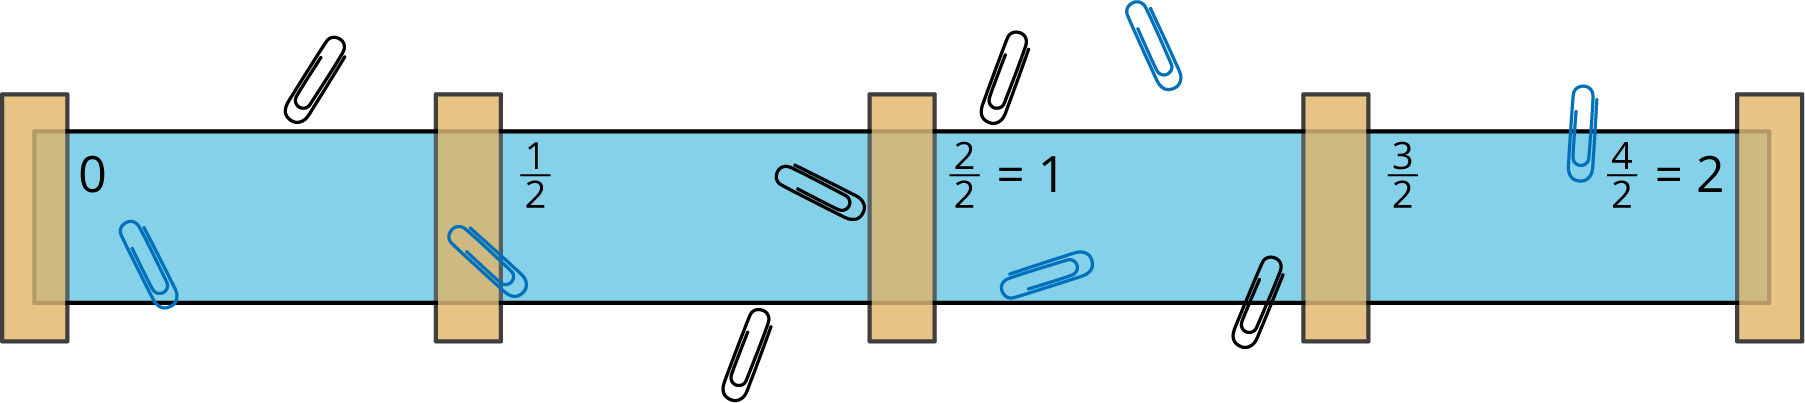 Image of paper clips on a number line strip. 